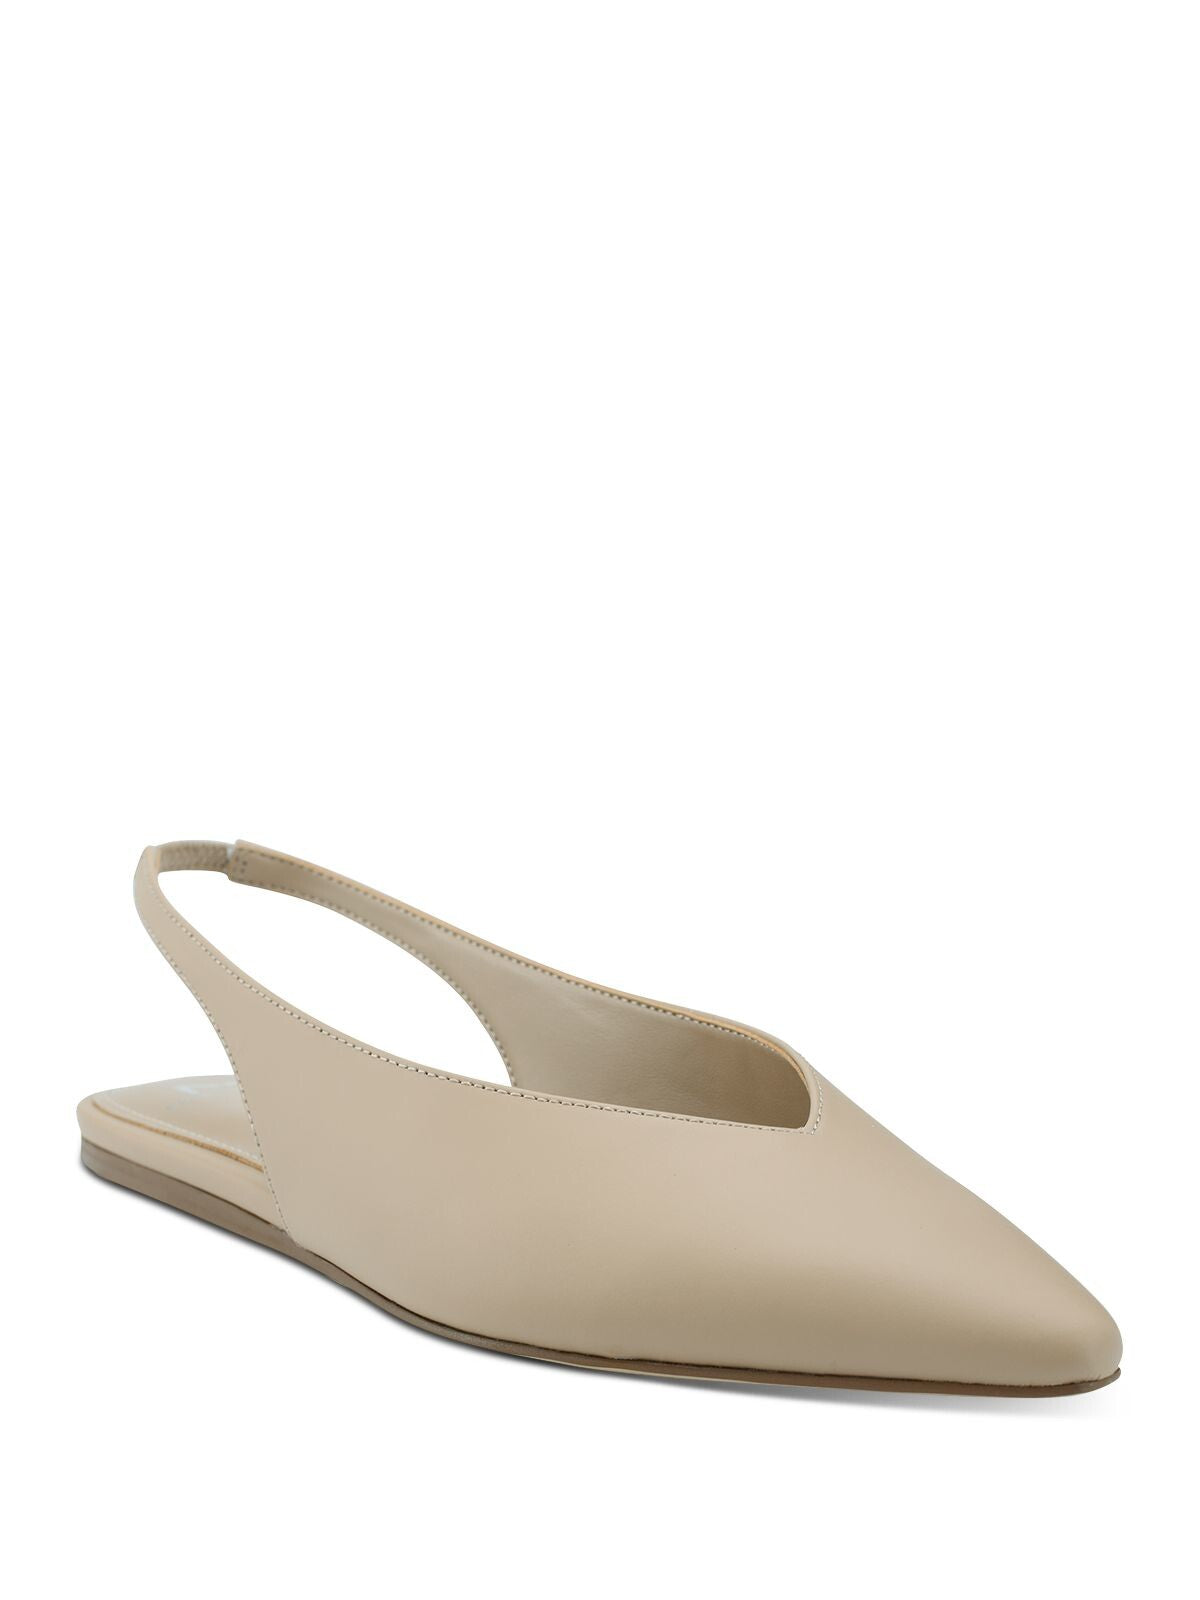 MARC FISHER Womens Beige Slingback Padded Graceful Pointed Toe Slip On Leather Flats Shoes 7 M